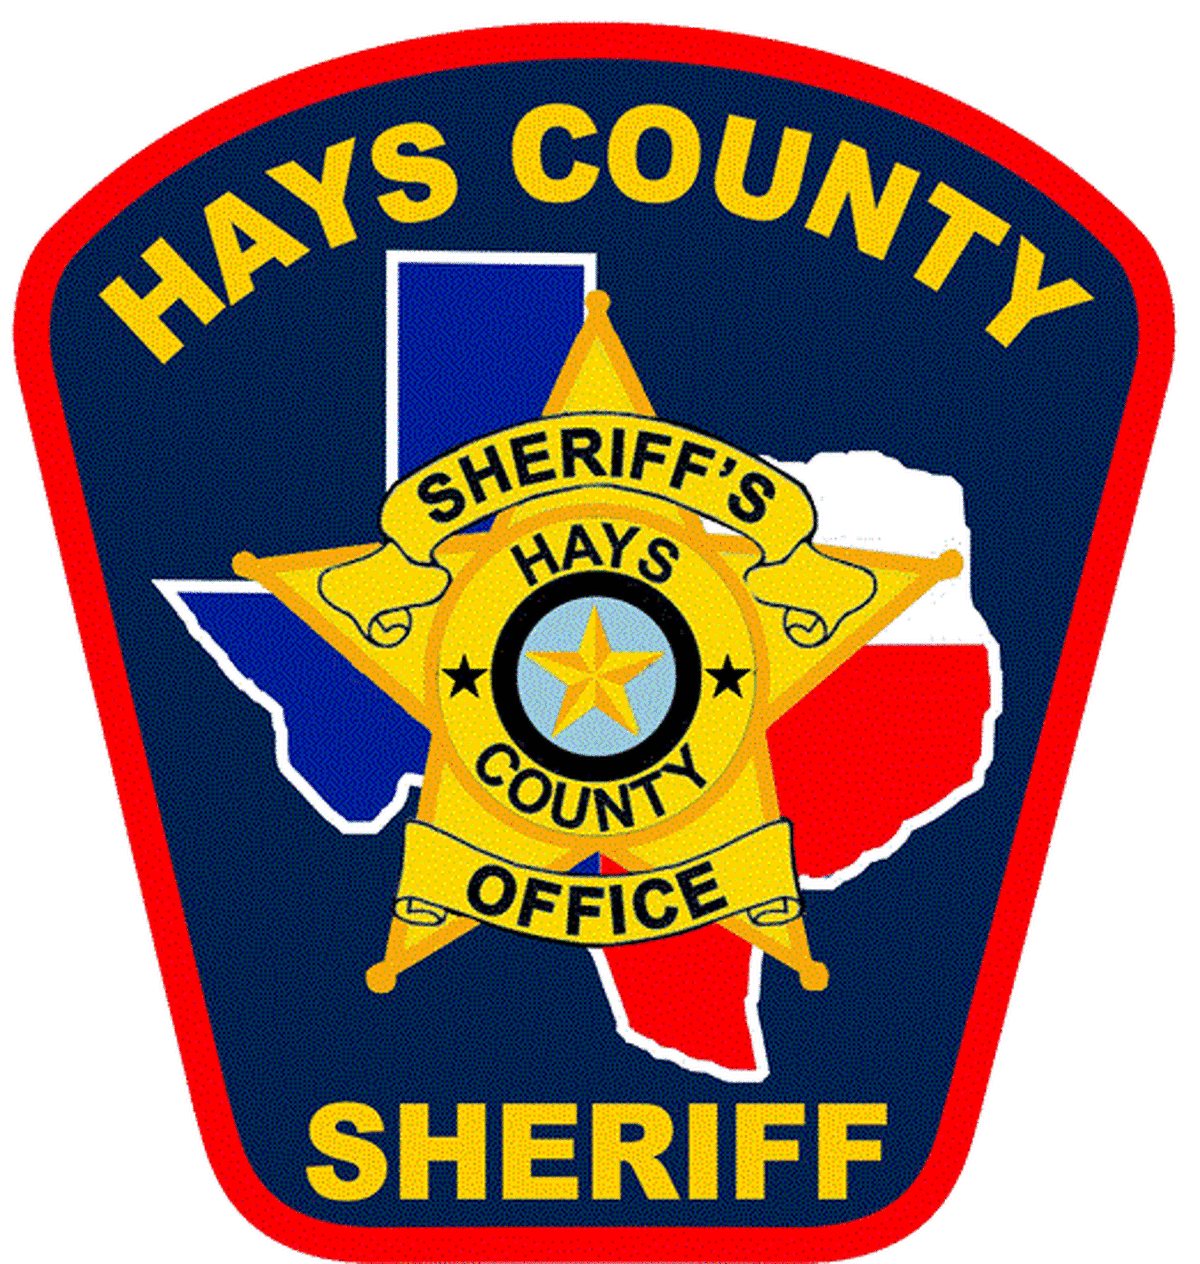 An inmate at the Hays County Jail who suffered a medical emergency on Tuesday died the following day at a local hospital, according to a sheriff's office news release.